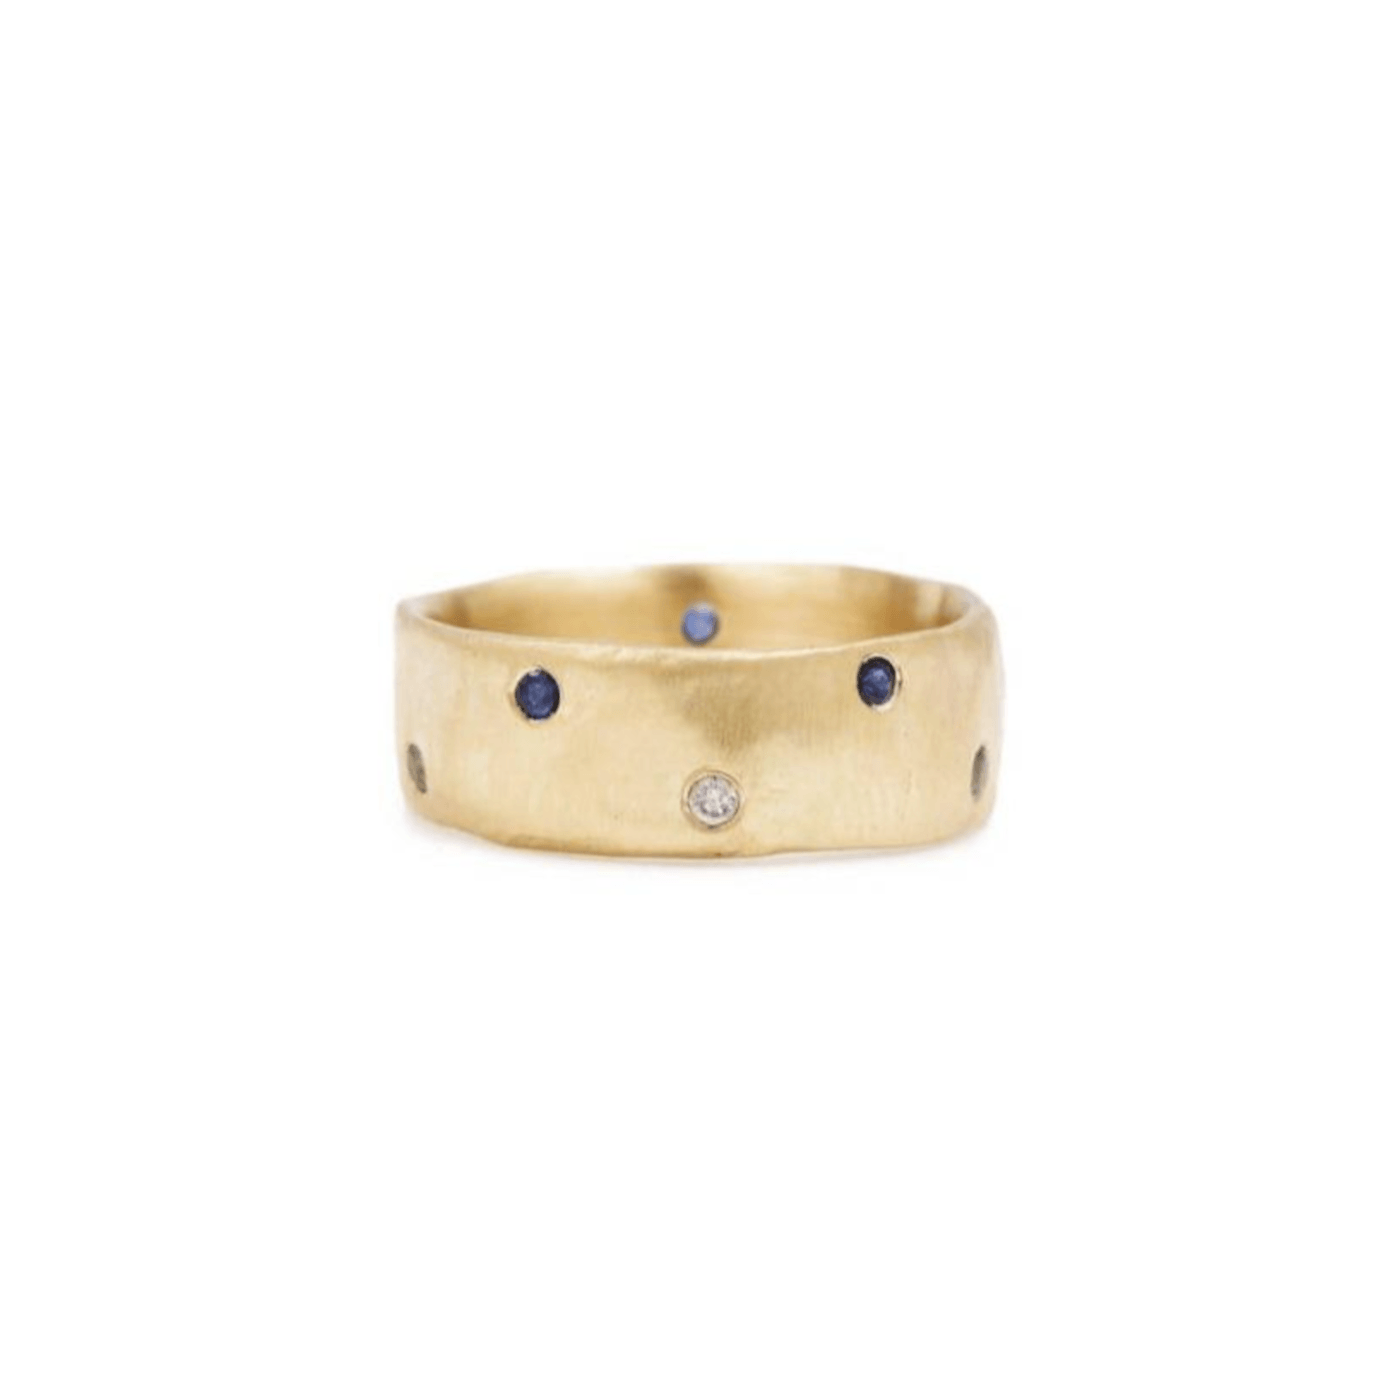 Handmade 18kt gold ring with diamonds and blue sapphires.